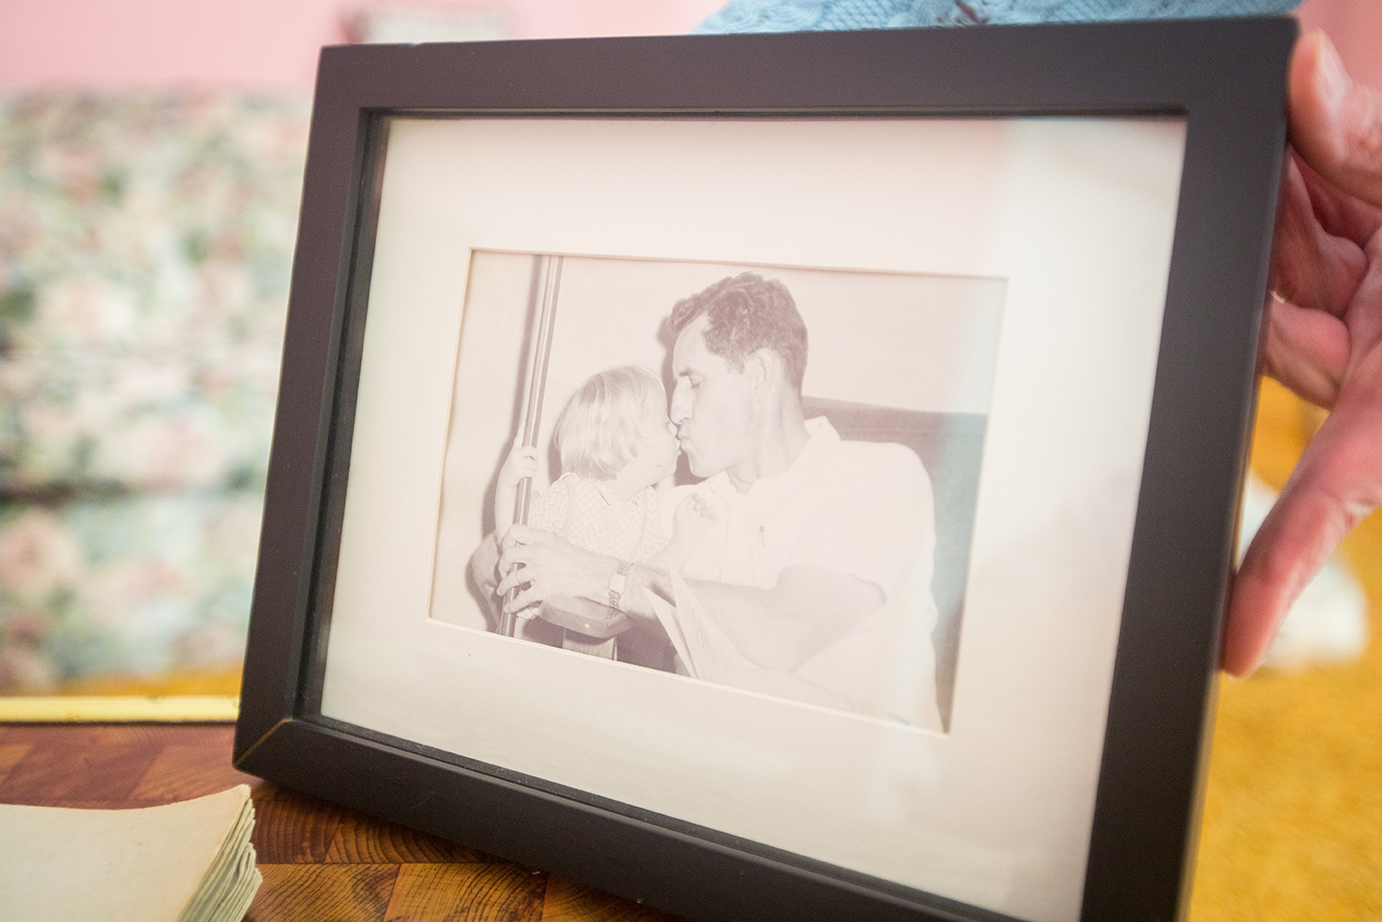  A framed photo of Kim and Rollin when they were younger. After nearly eight years of traveling back and forth from Ohio to care for her father and her sister, Kris now has some of her freedom back in her life. 